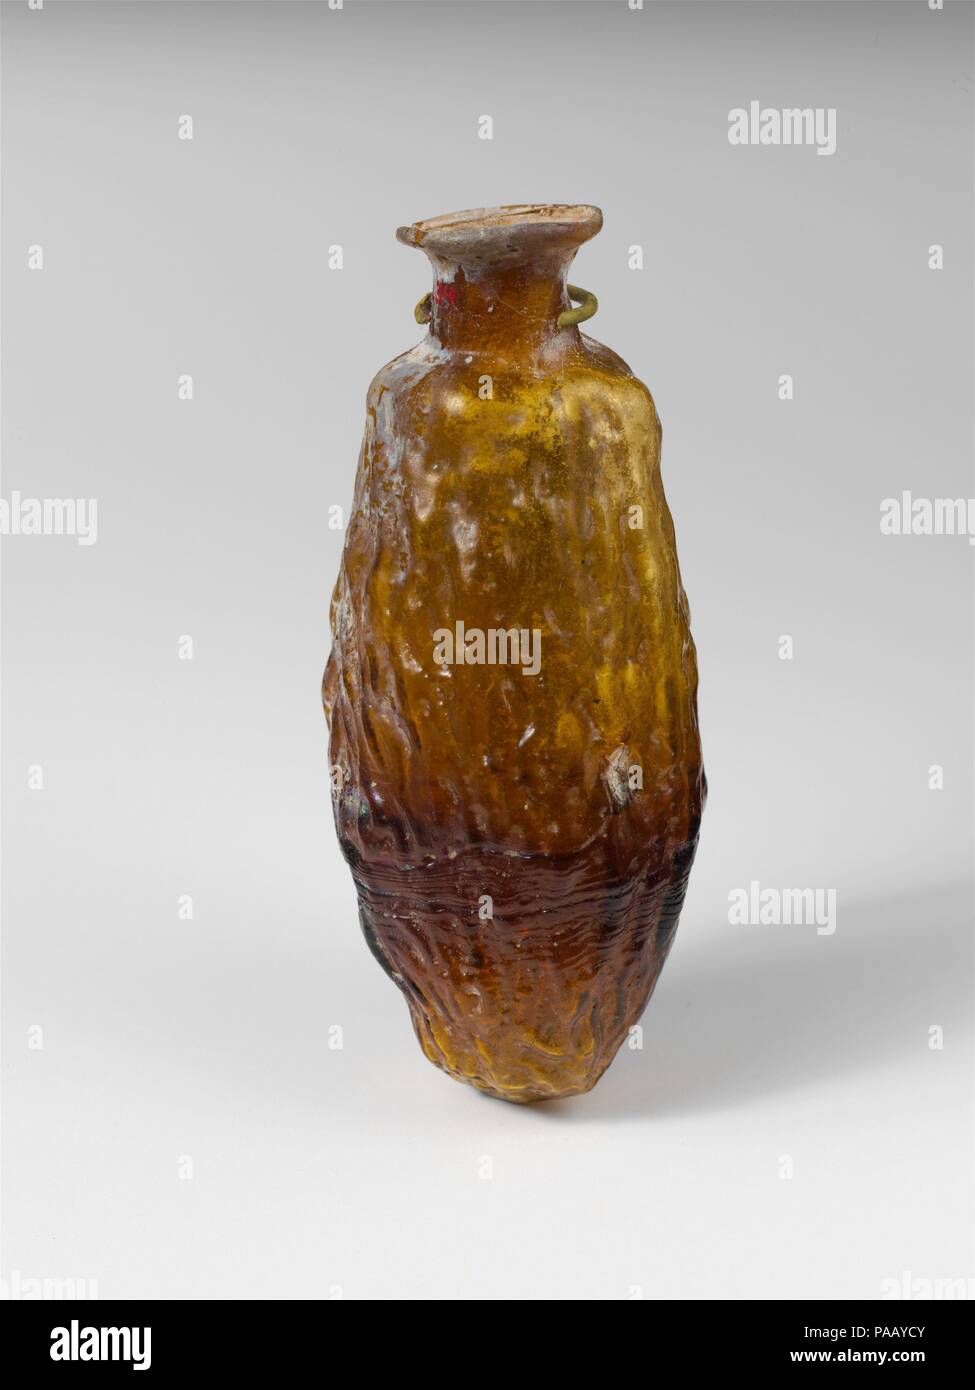 Glass bottle shaped like a date. Culture: Roman. Dimensions: H.: 2 7/8 in. (7.3 cm)  Diam.: 5/8 x 1 3/16 in. (1.6 x 3 cm). Date: mid-1st to early 2nd century A.D..  Translucent yellowish brown.  Thin, everted rim folded round and in; flaring neck with concave sides; elongated body; round bottom. One continuous mold seam around body.  Body molded into the shape of a wrinckled date, with pattern of short wavy ridges and hollows.  Intact, except for small chip and crack in rim; some bubbles and blowing striations; slight dulling, iridescence, and whitish weathering. Museum: Metropolitan Museum of Stock Photo